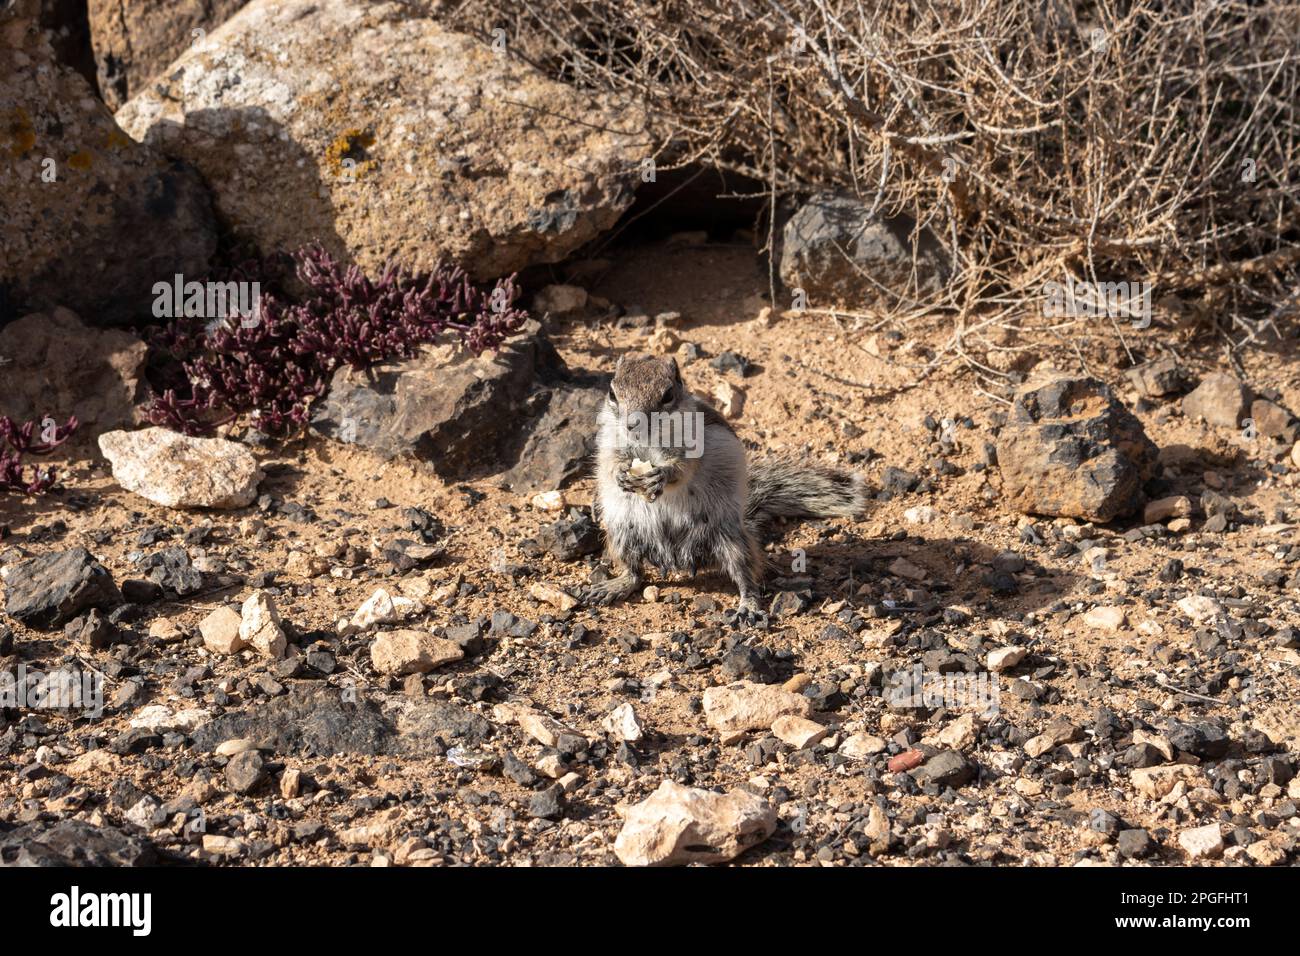 One of the always hungry chipmunks, eating peanut. Dry sandy soil with many stones and rocks. Molinos de Villaverde, Fuerteventura, Canary Islands, Sp Stock Photo